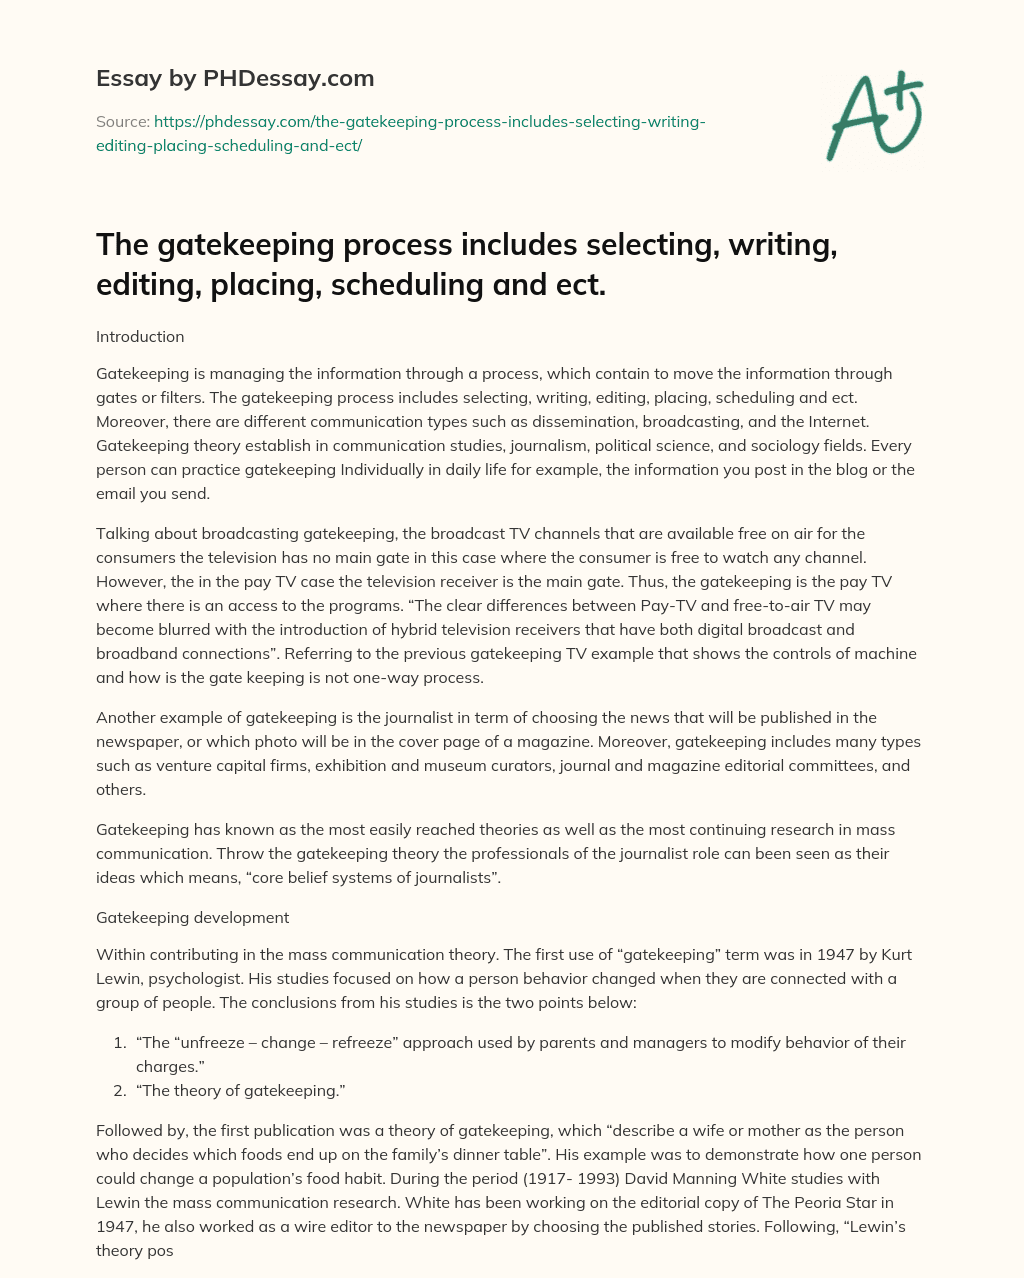 The gatekeeping process includes selecting, writing, editing, placing, scheduling and ect. essay